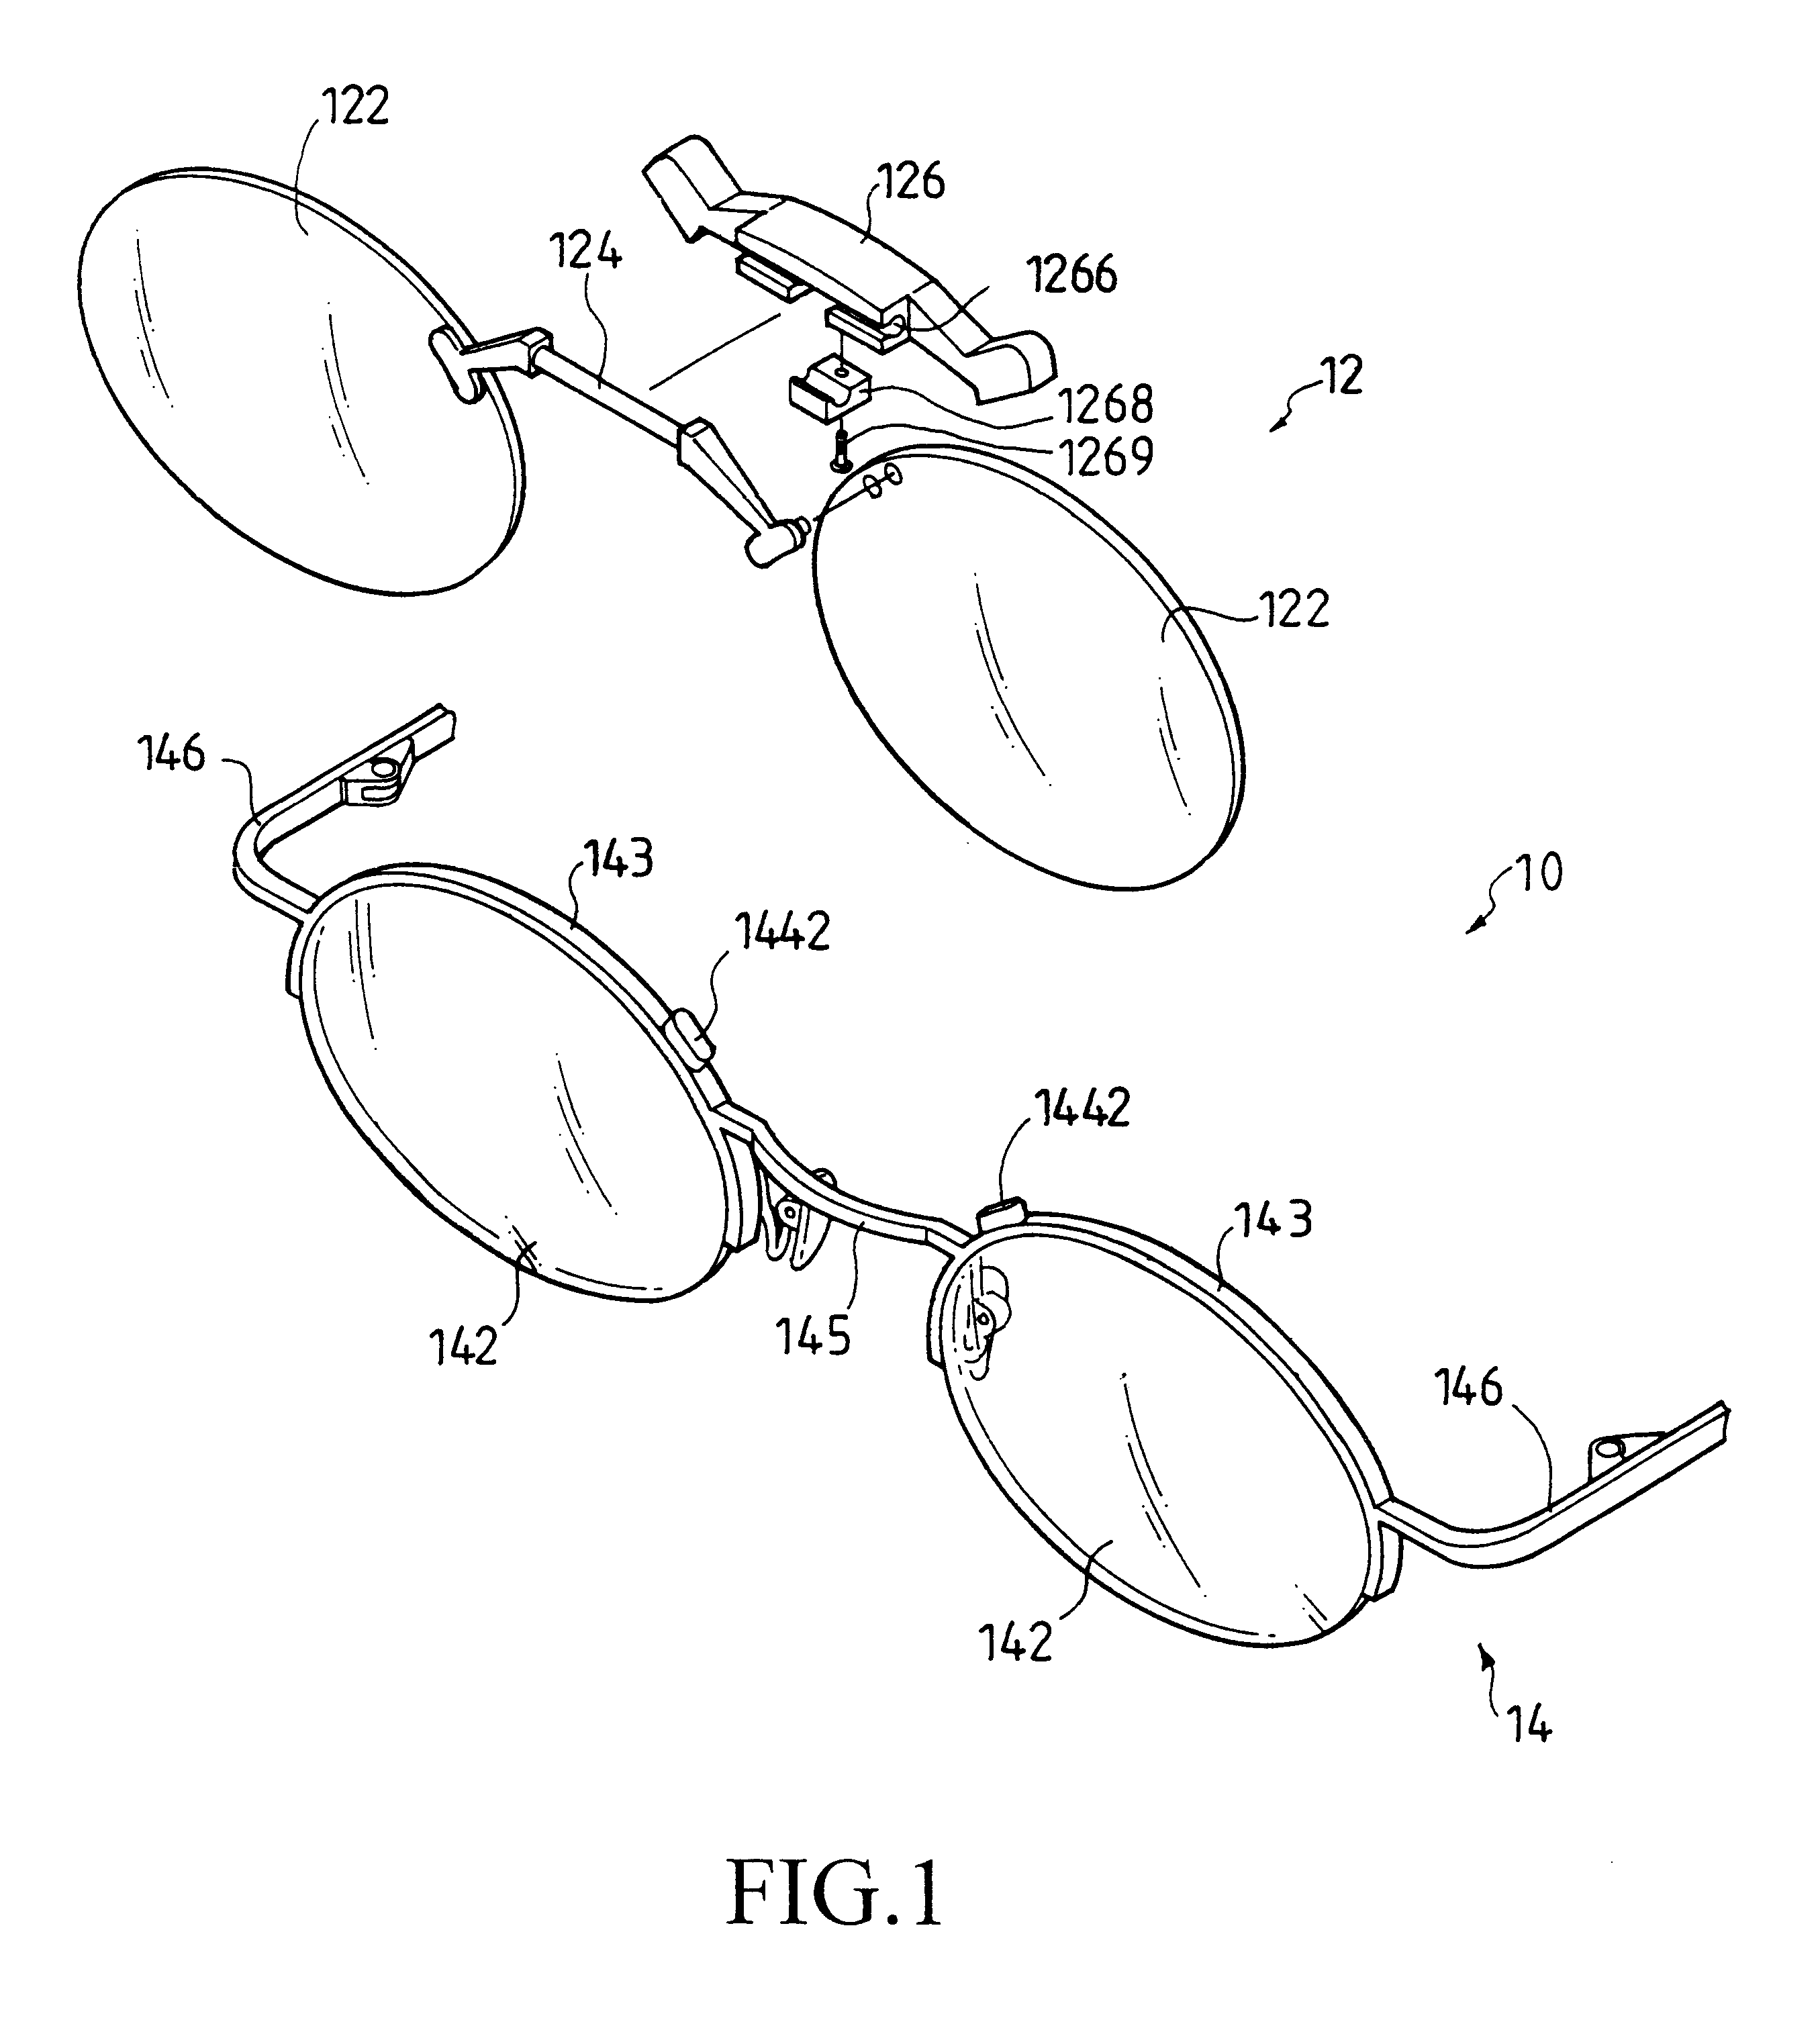 Auxiliary eyewear with laterally distant magnets on lens retaining mechanisms